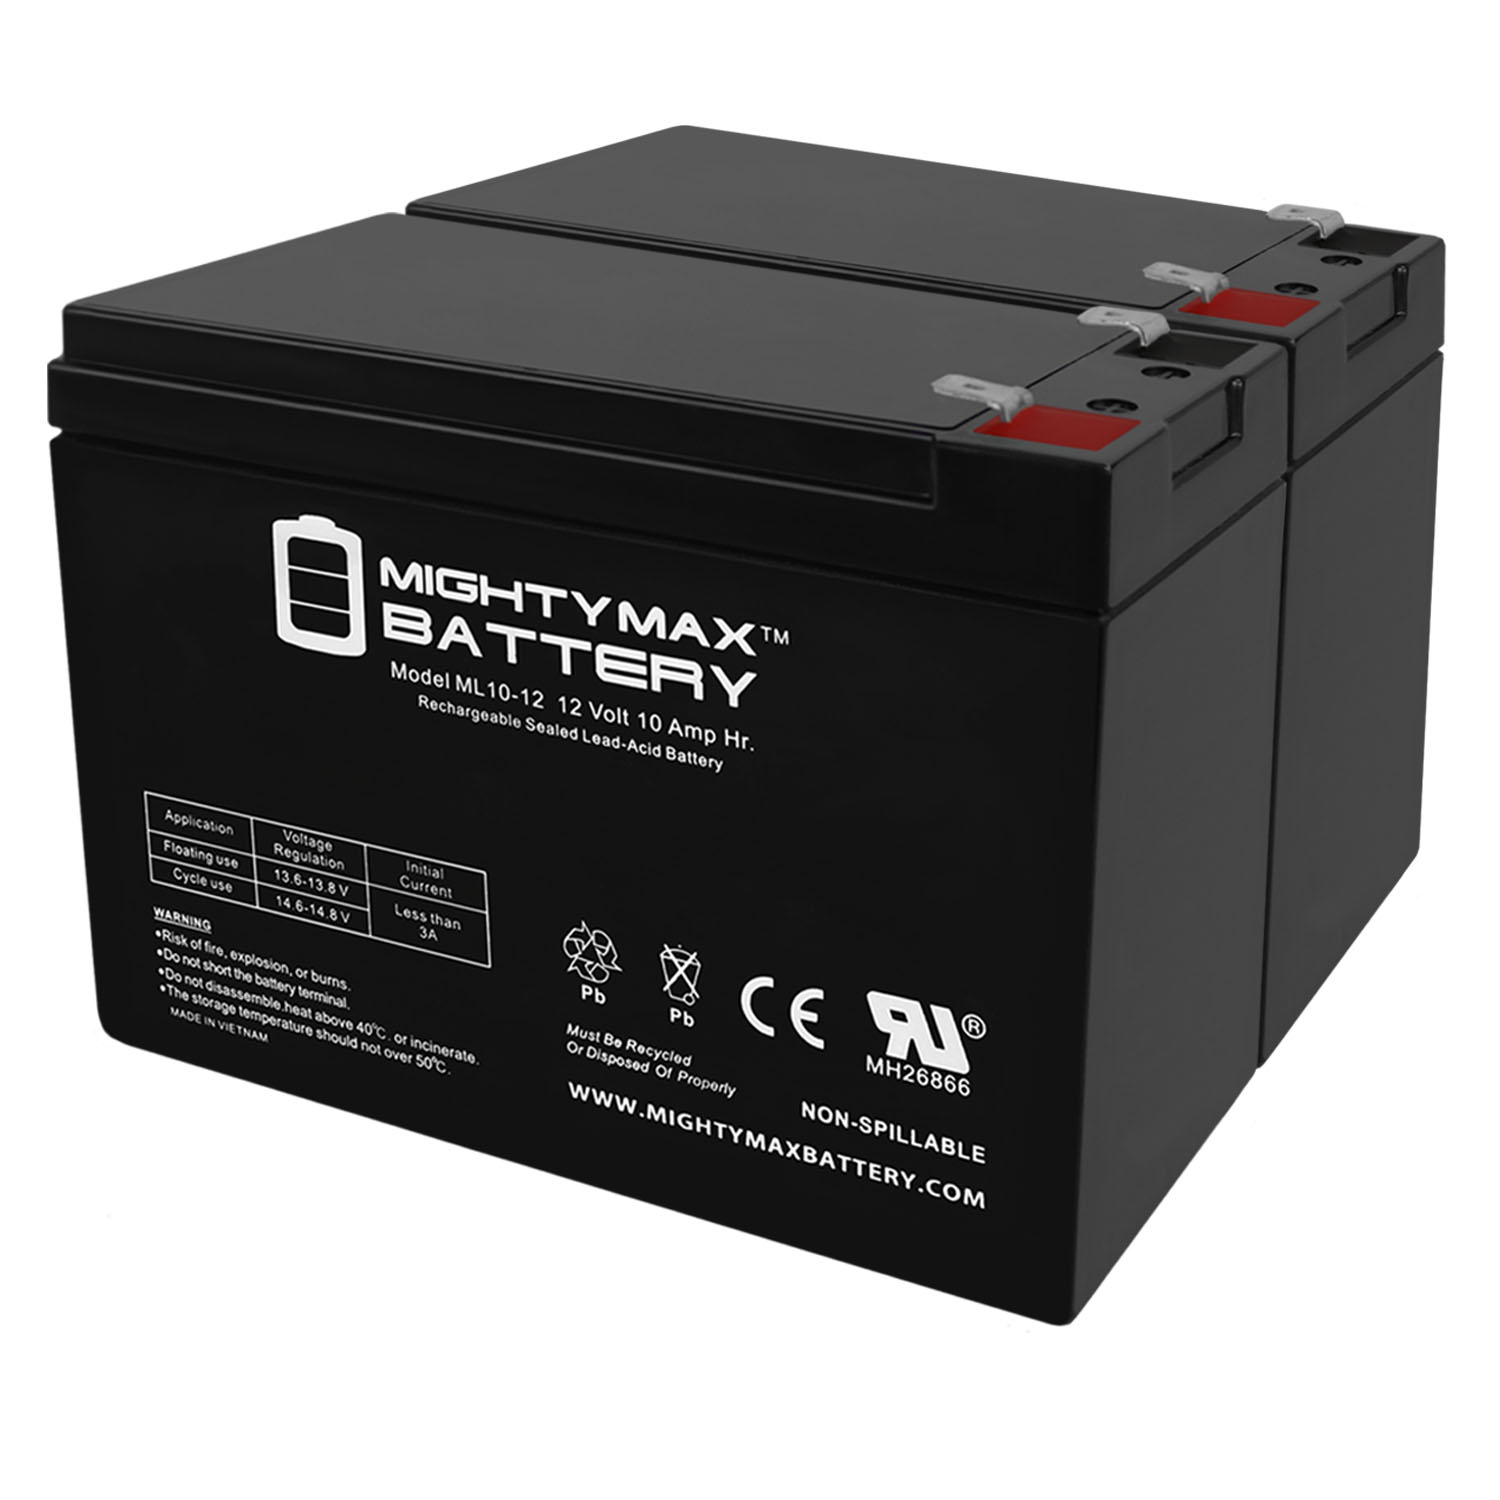 12V 10AH SLA Replacement Battery for W15128190003 - 2 Pack